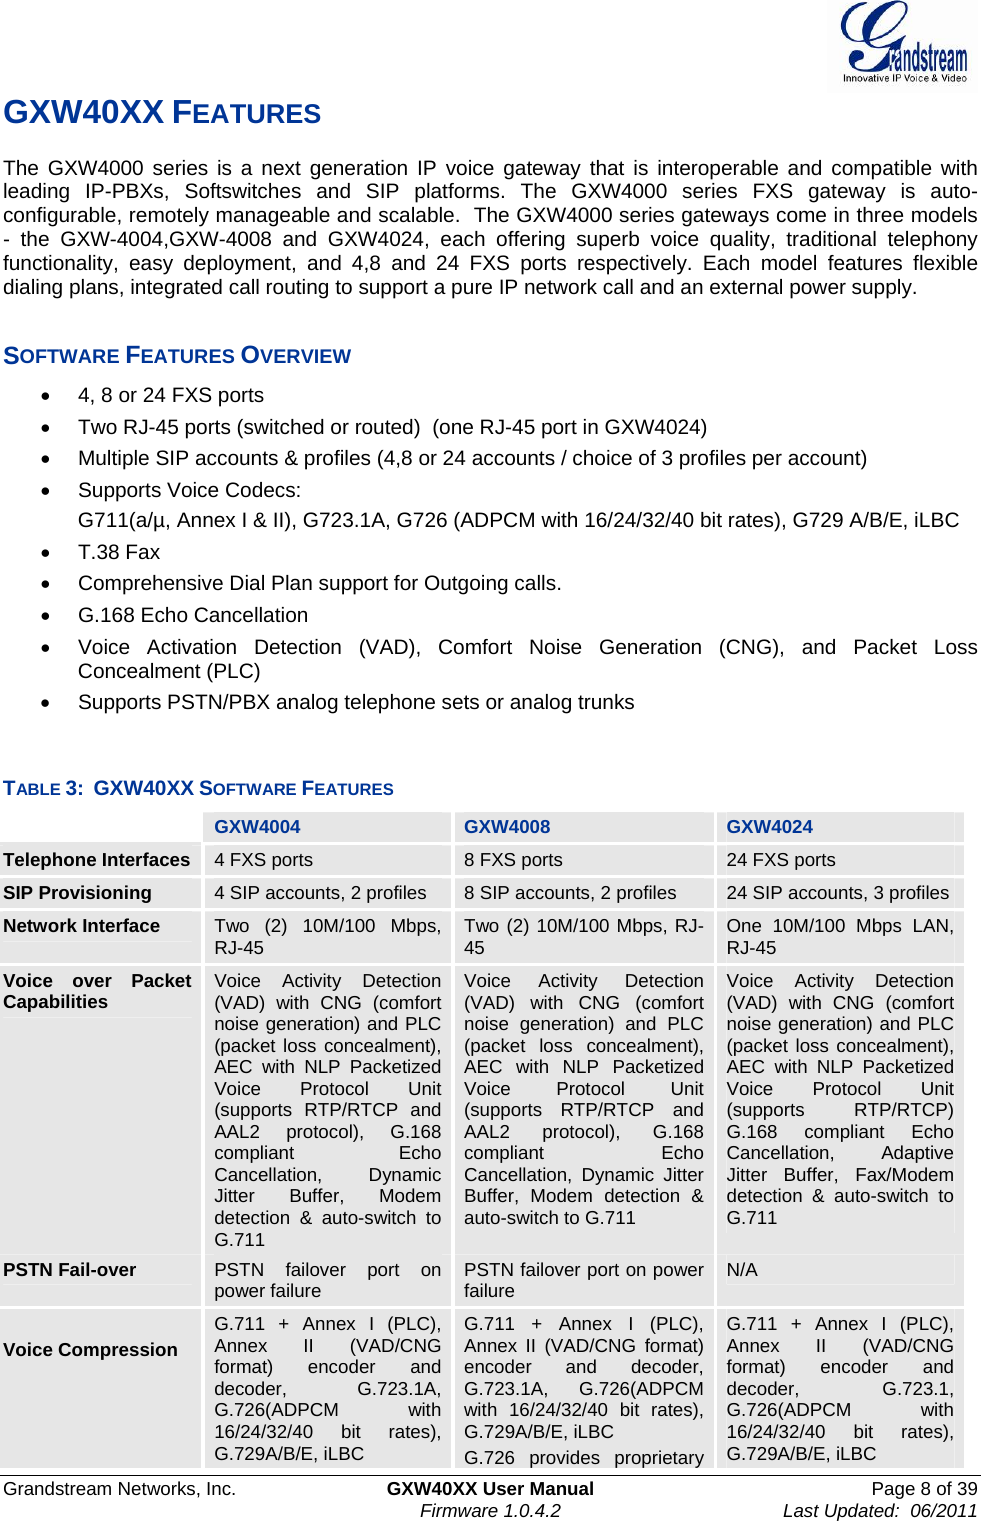  Grandstream Networks, Inc.  GXW40XX User Manual  Page 8 of 39    Firmware 1.0.4.2  Last Updated:  06/2011  GXW40XX FEATURES The GXW4000 series is a next generation IP voice gateway that is interoperable and compatible with leading IP-PBXs, Softswitches and SIP platforms. The GXW4000 series FXS gateway is auto-configurable, remotely manageable and scalable.  The GXW4000 series gateways come in three models - the GXW-4004,GXW-4008 and GXW4024, each offering superb voice quality, traditional telephony functionality, easy deployment, and 4,8 and 24 FXS ports respectively. Each model features flexible dialing plans, integrated call routing to support a pure IP network call and an external power supply.    SOFTWARE FEATURES OVERVIEW •  4, 8 or 24 FXS ports •  Two RJ-45 ports (switched or routed)  (one RJ-45 port in GXW4024) •  Multiple SIP accounts &amp; profiles (4,8 or 24 accounts / choice of 3 profiles per account) •  Supports Voice Codecs:  G711(a/µ, Annex I &amp; II), G723.1A, G726 (ADPCM with 16/24/32/40 bit rates), G729 A/B/E, iLBC •  T.38 Fax  •  Comprehensive Dial Plan support for Outgoing calls. • G.168 Echo Cancellation •  Voice Activation Detection (VAD), Comfort Noise Generation (CNG), and Packet Loss Concealment (PLC) •  Supports PSTN/PBX analog telephone sets or analog trunks  TABLE 3:  GXW40XX SOFTWARE FEATURES  GXW4004  GXW4008  GXW4024 Telephone Interfaces  4 FXS ports 8 FXS ports 24 FXS ports SIP Provisioning  4 SIP accounts, 2 profiles 8 SIP accounts, 2 profiles 24 SIP accounts, 3 profiles Network Interface  Two (2) 10M/100 Mbps, RJ-45 Two (2) 10M/100 Mbps, RJ-45 One 10M/100 Mbps LAN, RJ-45 Voice over Packet Capabilities  Voice Activity Detection (VAD) with CNG (comfort noise generation) and PLC (packet loss concealment), AEC with NLP Packetized Voice Protocol Unit (supports RTP/RTCP and AAL2 protocol), G.168 compliant Echo Cancellation, Dynamic Jitter Buffer, Modem detection &amp; auto-switch to G.711 Voice Activity Detection (VAD) with CNG (comfort noise generation) and PLC (packet loss concealment), AEC with NLP Packetized Voice Protocol Unit (supports RTP/RTCP and AAL2 protocol), G.168 compliant Echo Cancellation, Dynamic Jitter Buffer, Modem detection &amp; auto-switch to G.711 Voice Activity Detection (VAD) with CNG (comfort noise generation) and PLC (packet loss concealment), AEC with NLP Packetized Voice Protocol Unit (supports RTP/RTCP) G.168 compliant Echo Cancellation, Adaptive Jitter Buffer, Fax/Modem detection &amp; auto-switch to G.711 PSTN Fail-over  PSTN failover port on power failure PSTN failover port on power failure N/A  Voice Compression G.711 + Annex I (PLC), Annex II (VAD/CNG format) encoder and decoder, G.723.1A, G.726(ADPCM with 16/24/32/40 bit rates), G.729A/B/E, iLBC G.711 + Annex I (PLC), Annex II (VAD/CNG format) encoder and decoder, G.723.1A, G.726(ADPCM with 16/24/32/40 bit rates), G.729A/B/E, iLBC G.726 provides proprietary G.711 + Annex I (PLC), Annex II (VAD/CNG format) encoder and decoder, G.723.1, G.726(ADPCM with 16/24/32/40 bit rates), G.729A/B/E, iLBC 